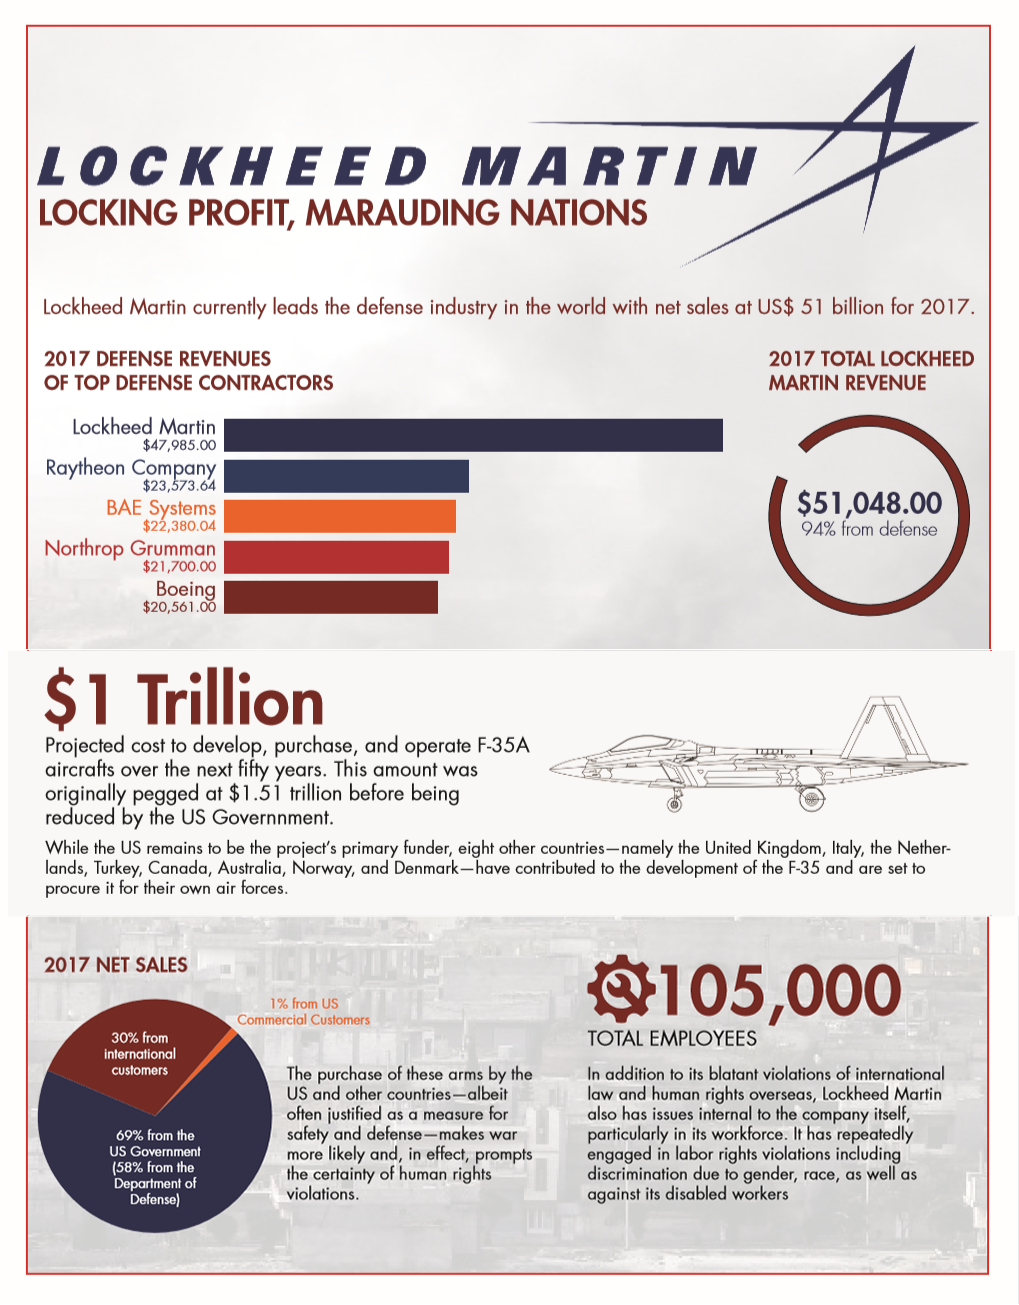 You are currently viewing Lockheed Martin: Locking Profit, Marauding Nations